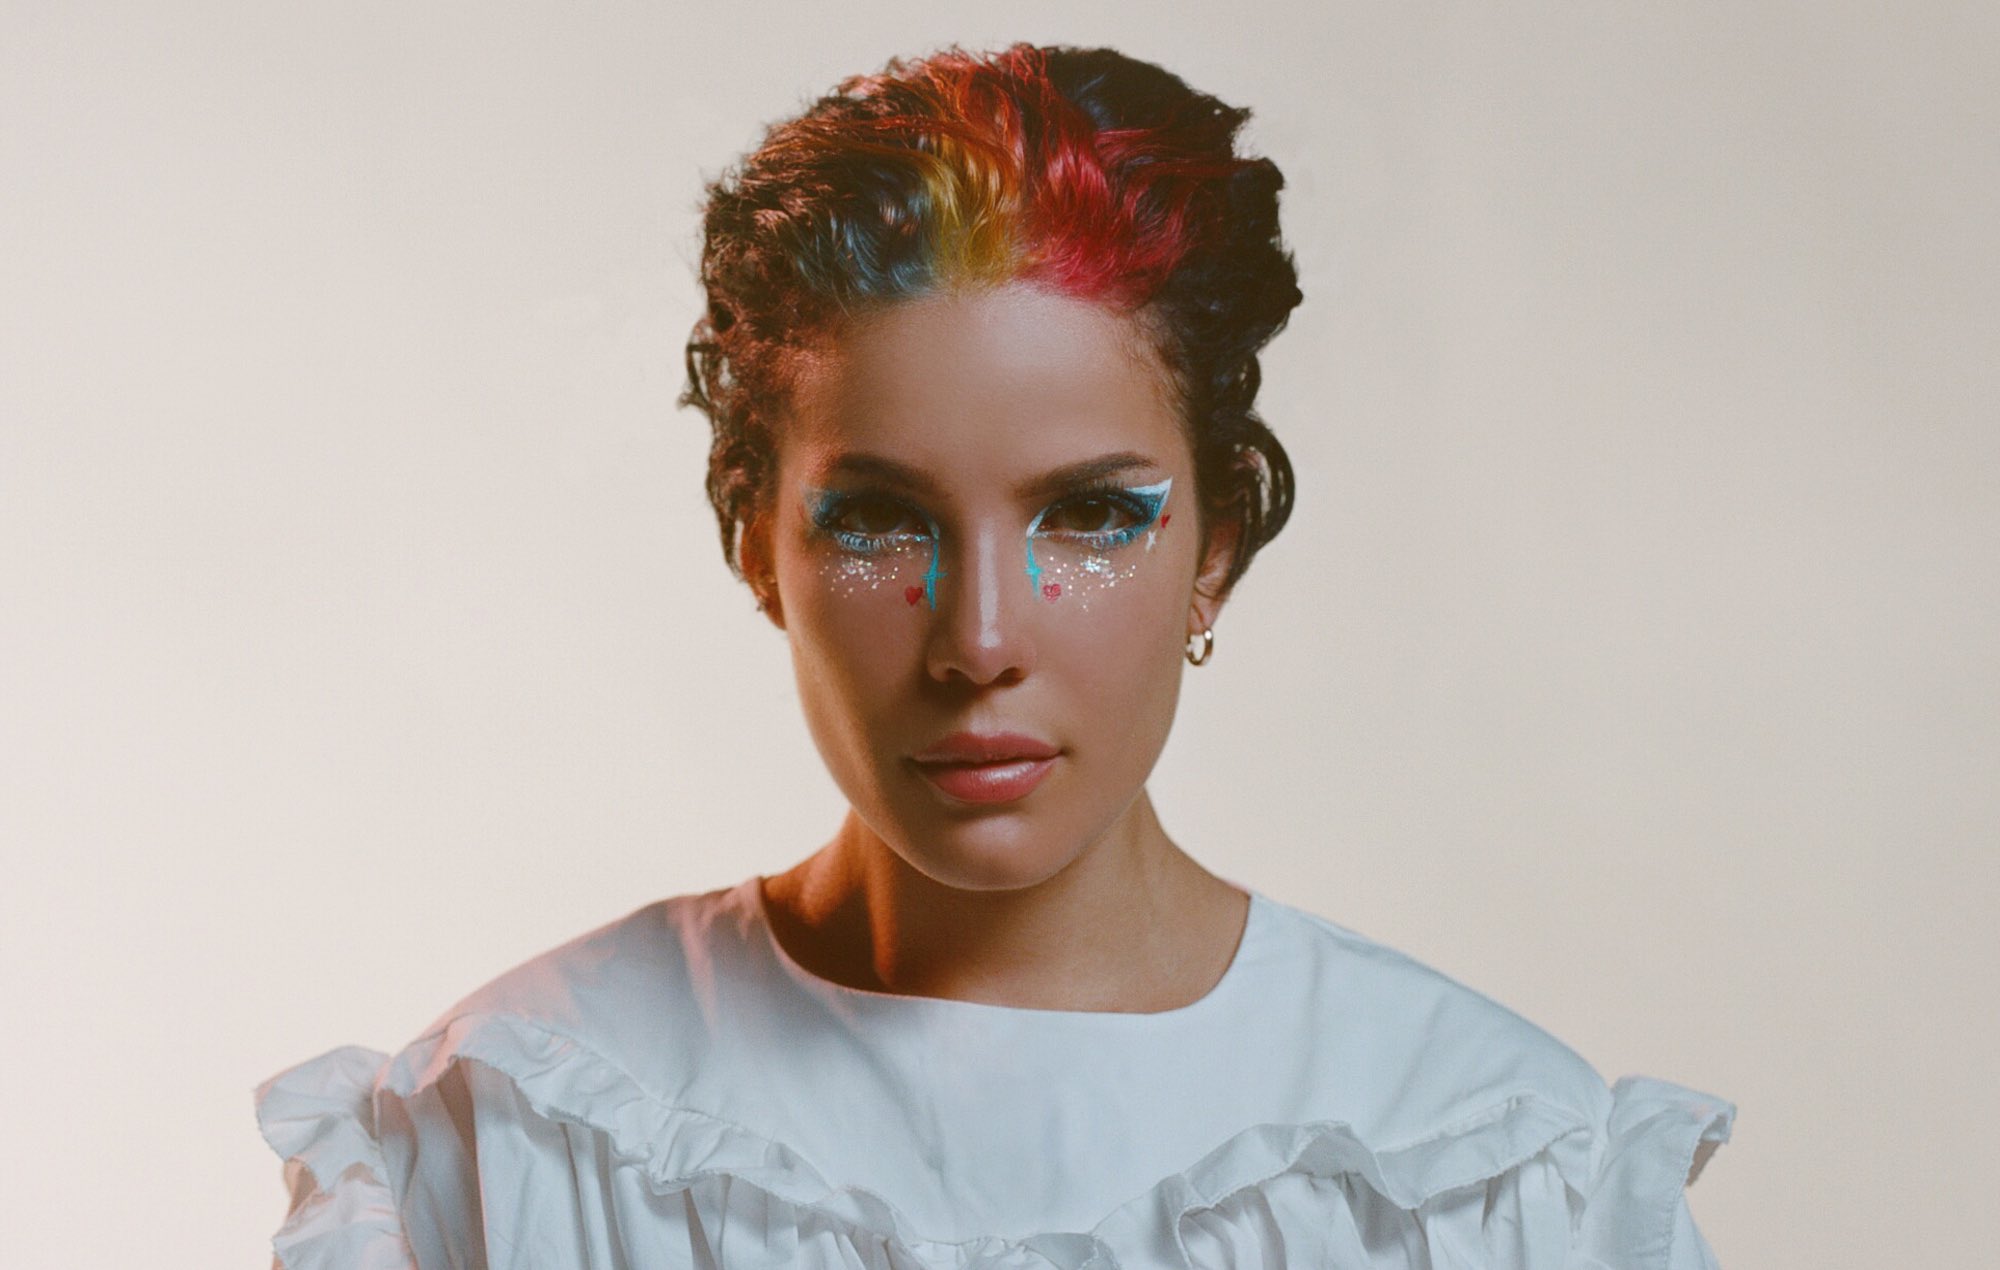 'Manic' the 3rd studio album of Halsey, was completed three years